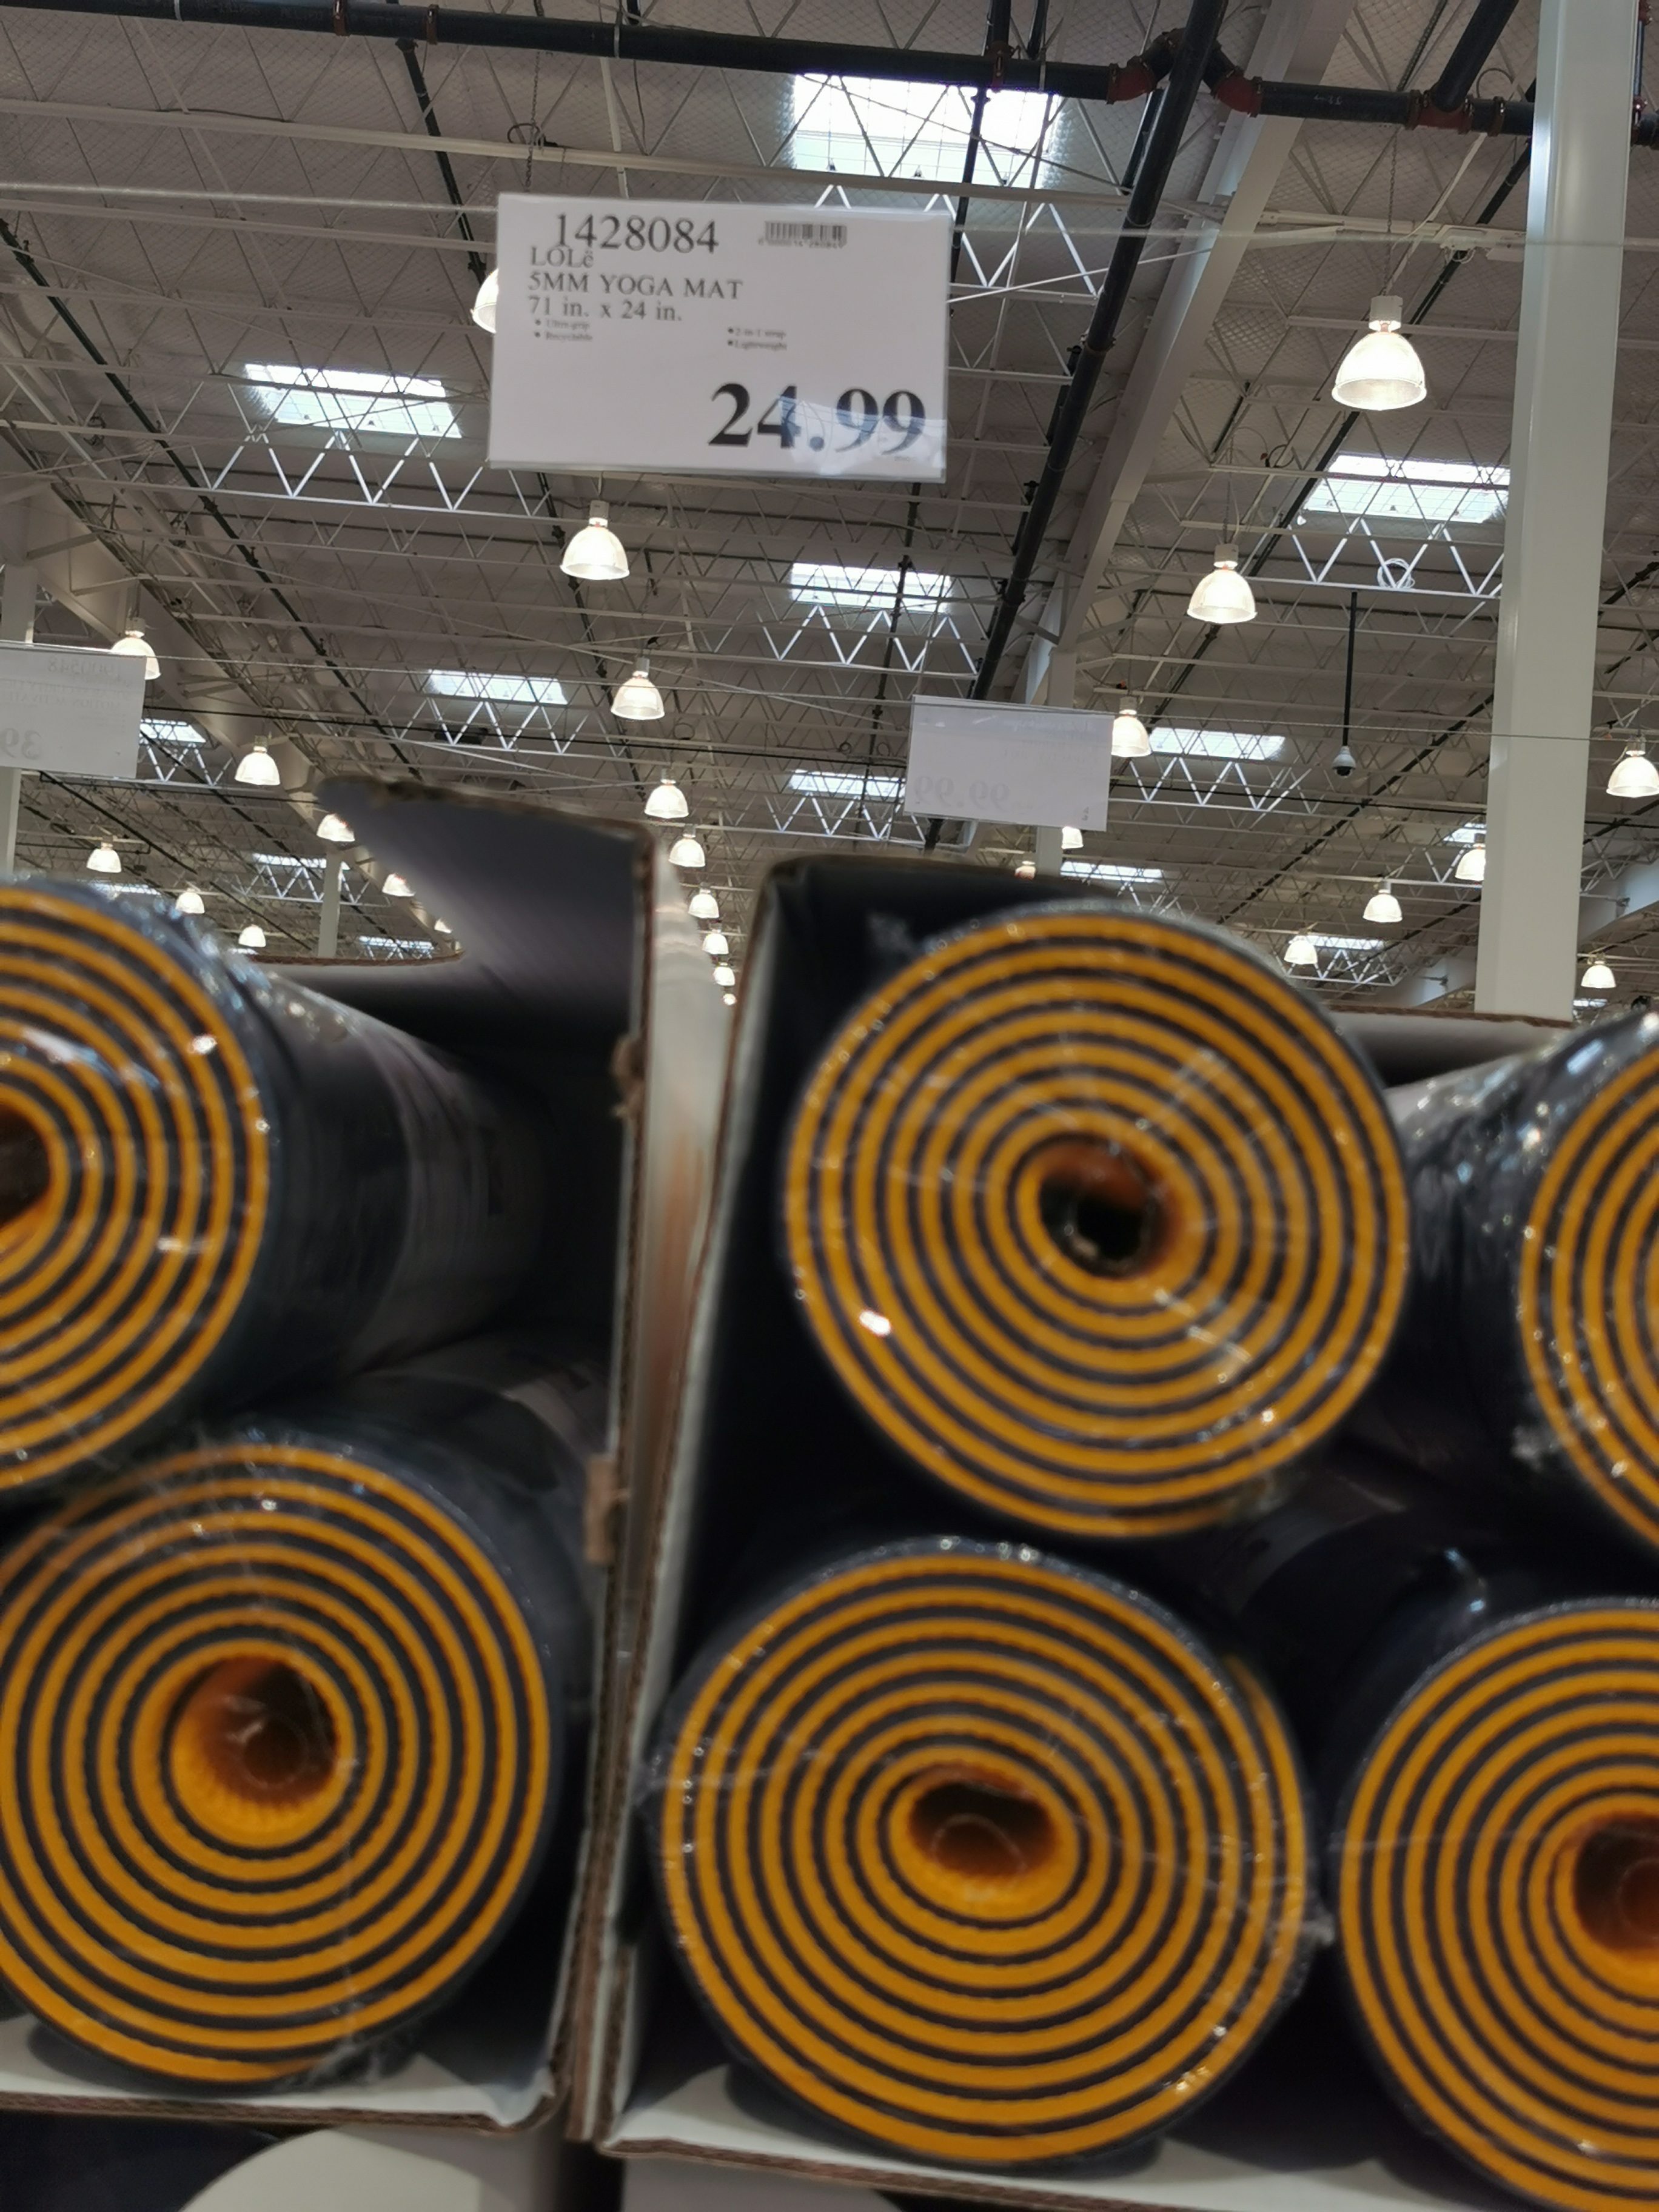 Costco] Costco.ca: Lole yoga mat with 2in 1 strap $24.99 - RedFlagDeals.com  Forums